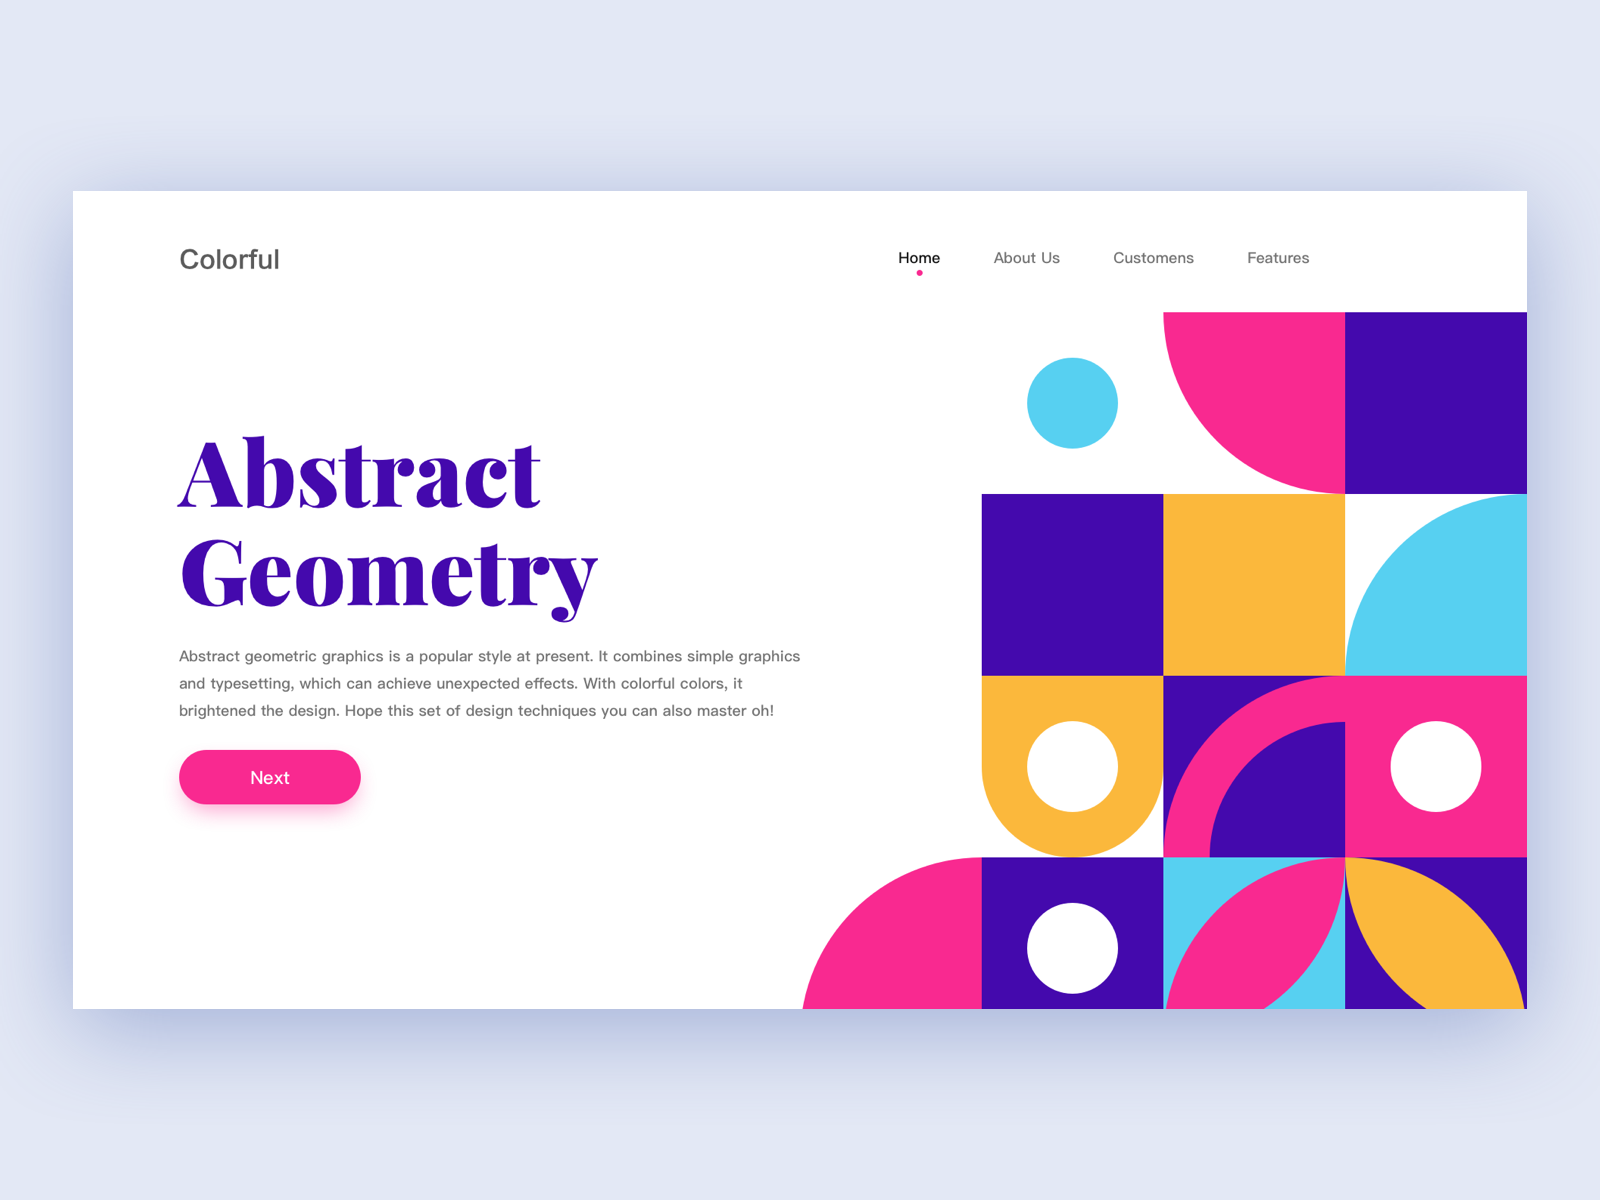 Abstract geometric by yaslin on Dribbble